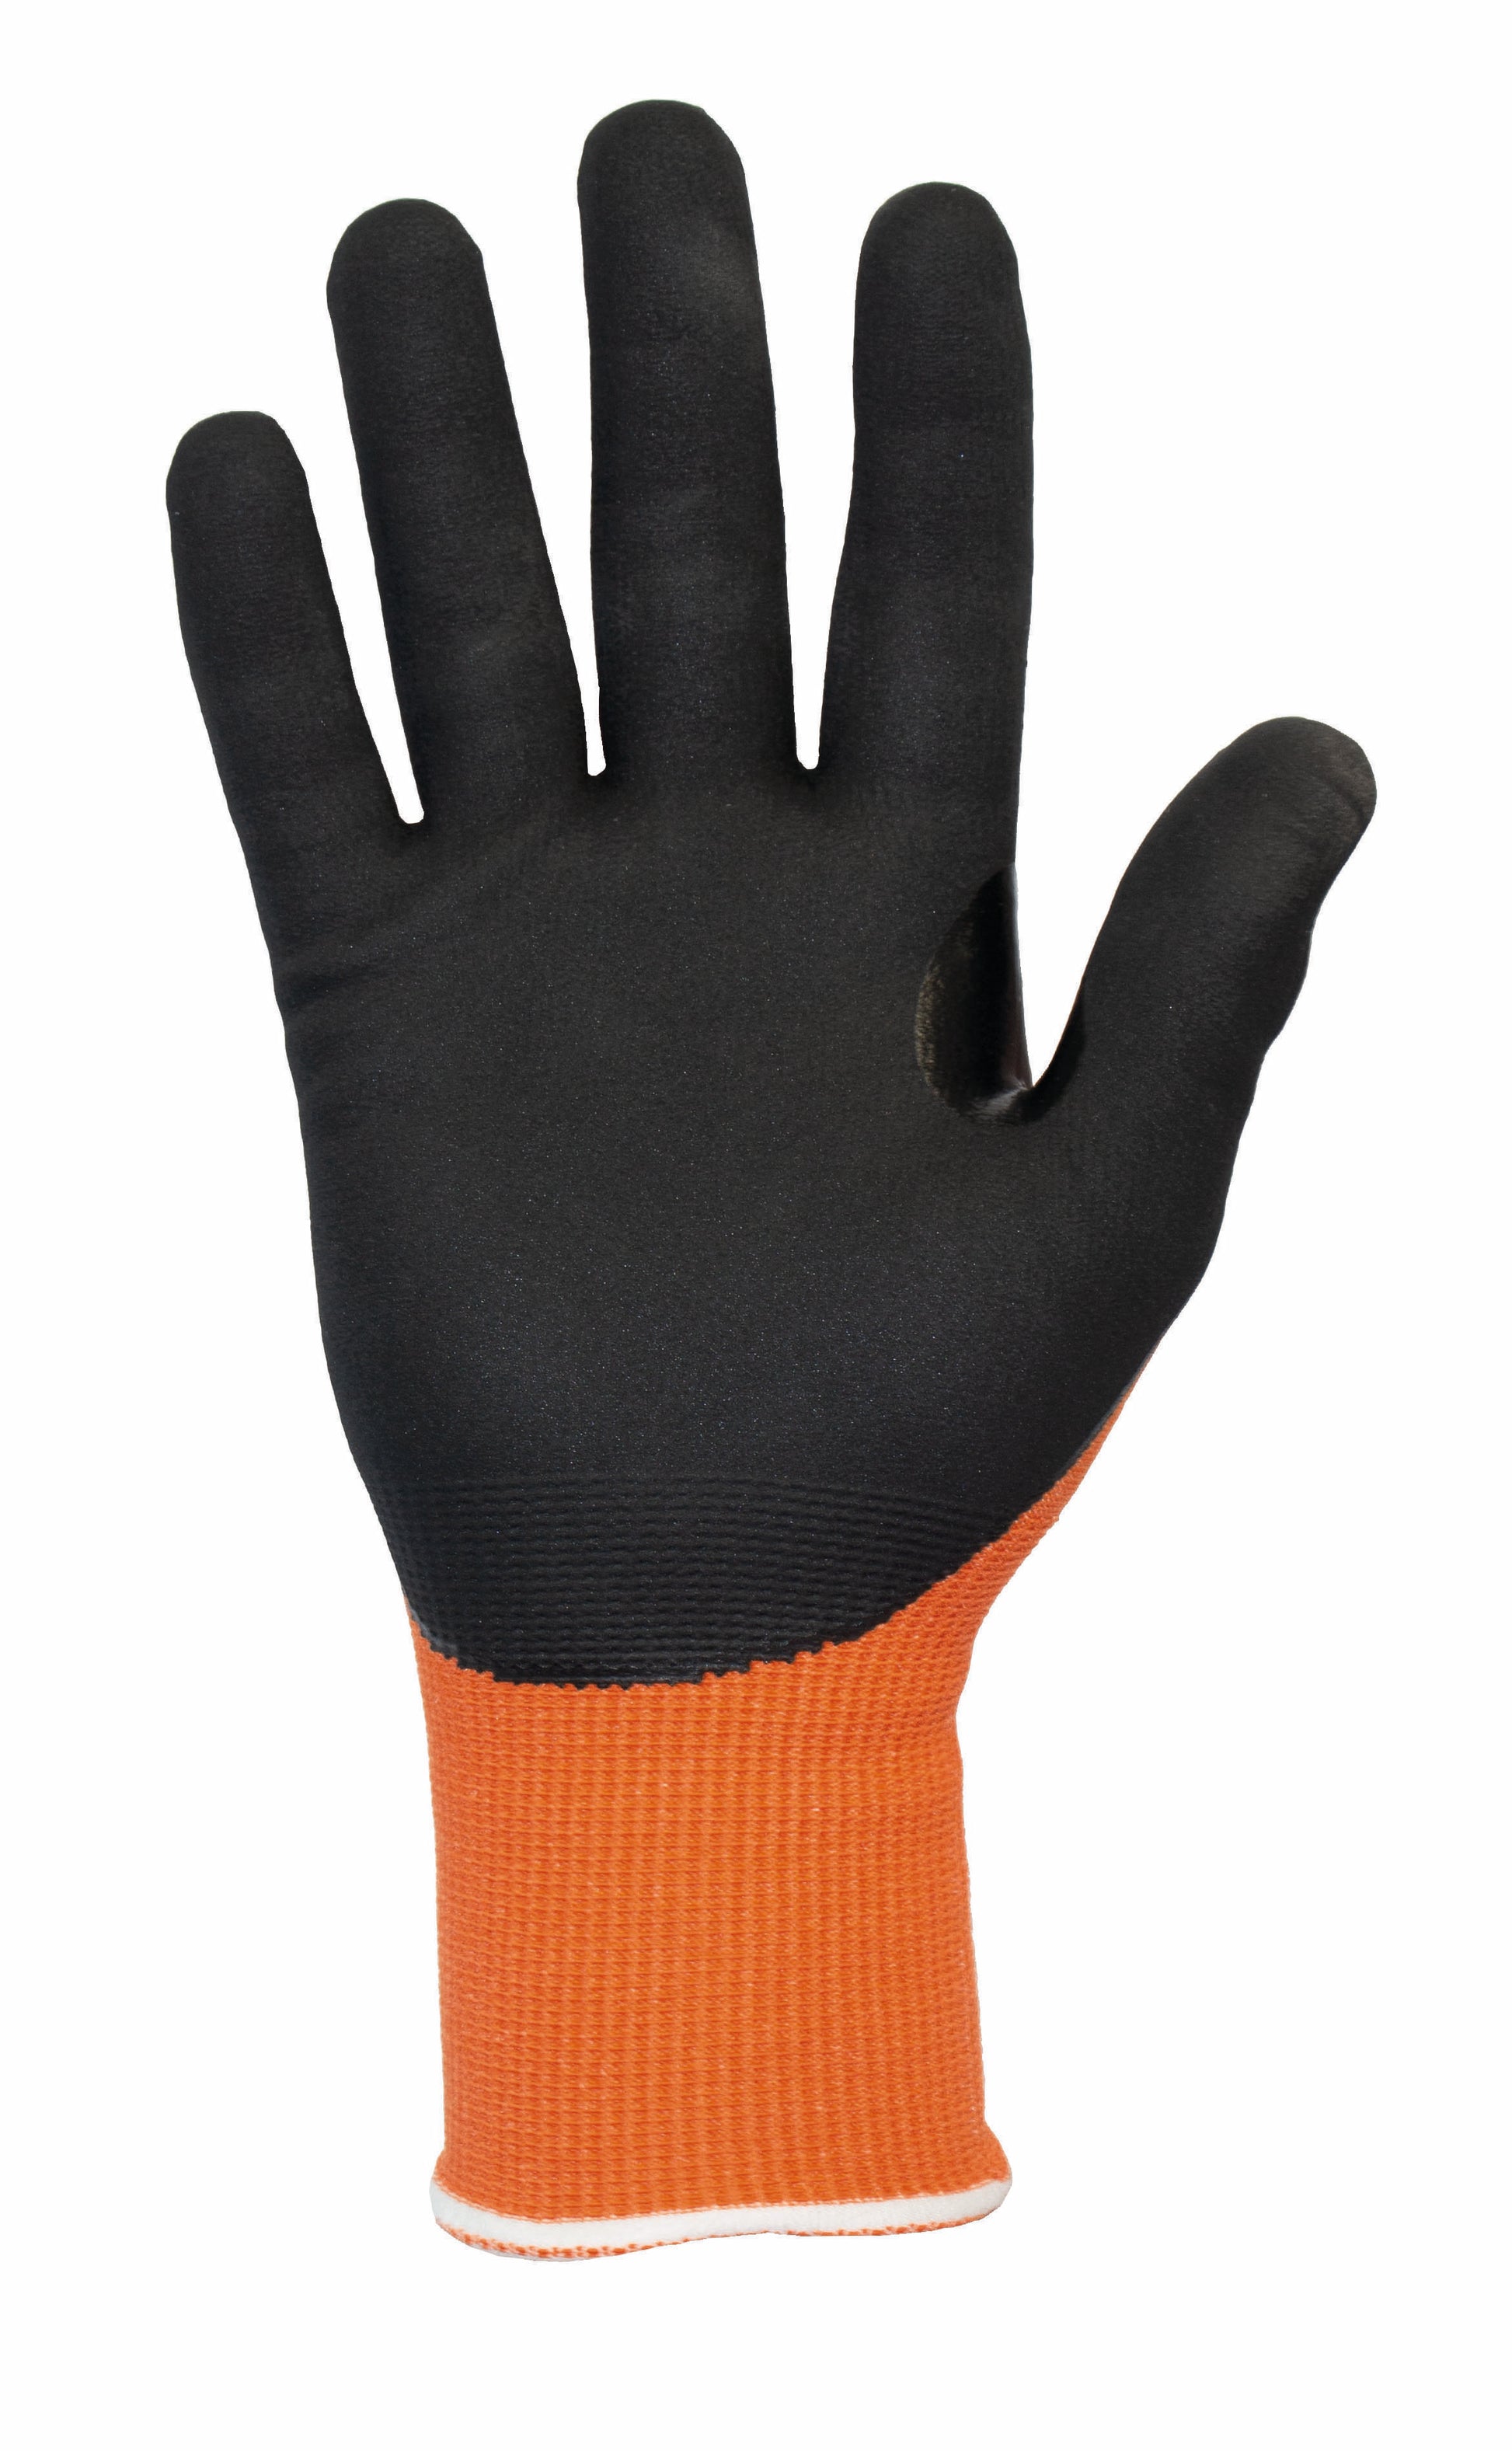 This Eco-friendly Traffi® TG3240 MicroDex LXT® Nitrile Coated Orange 15-gauge Cut Level A2 Safety Gloves are Carbon Neutral Certified, repels water and oil while providing hot contact resistance.